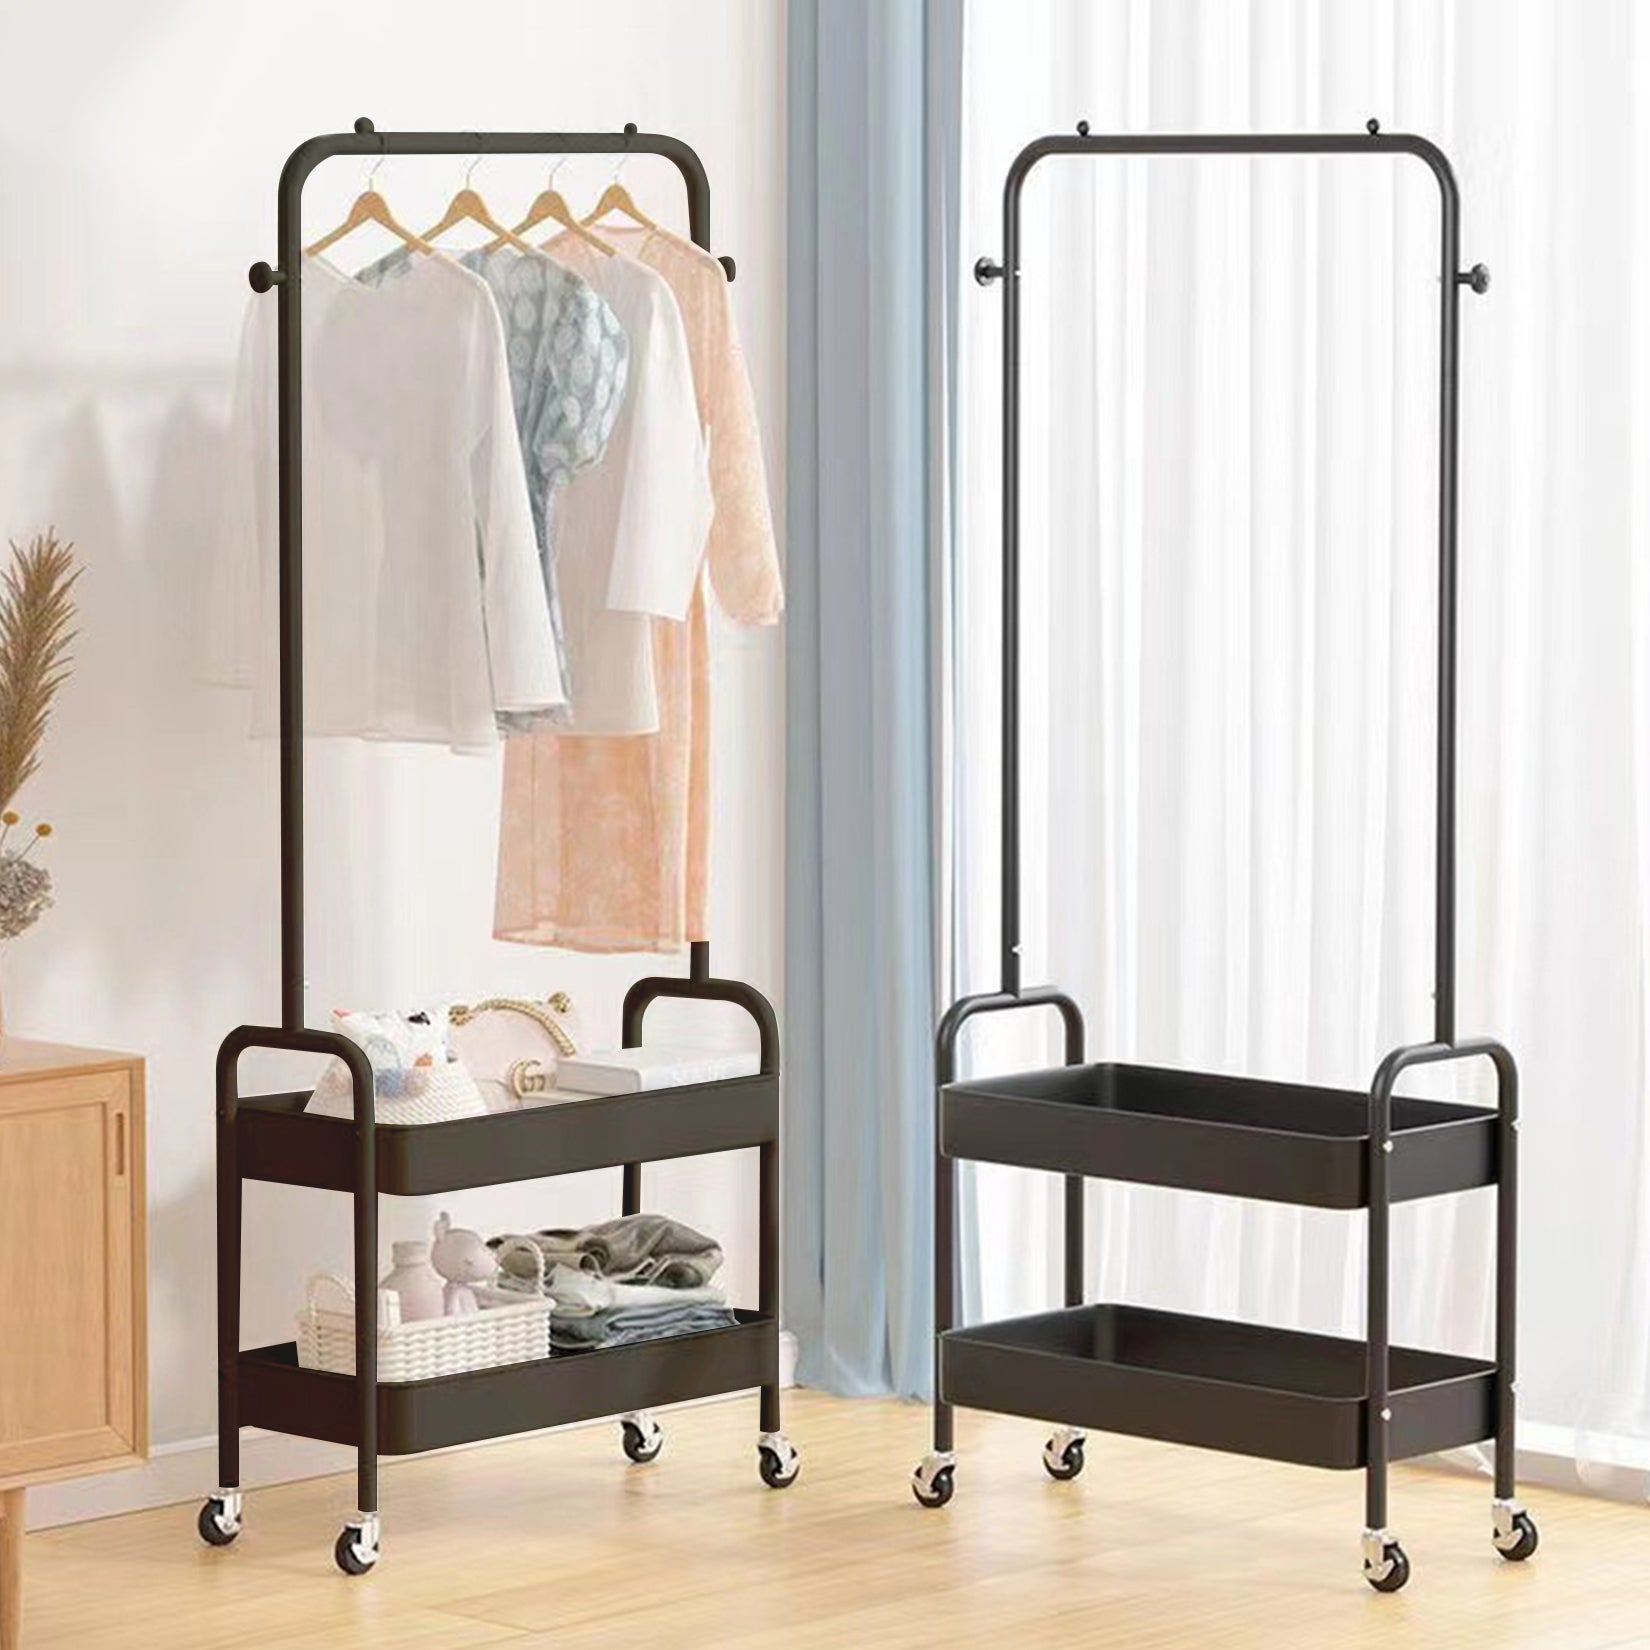 HYGRAD Metal Clothes Rack On Wheels Portable Clothes Rail For Hanging Clothes With Shoe Storage Shelfs Portable Clothes Rack Caddy For Bedroom Wardrobe In Pink White Or Black